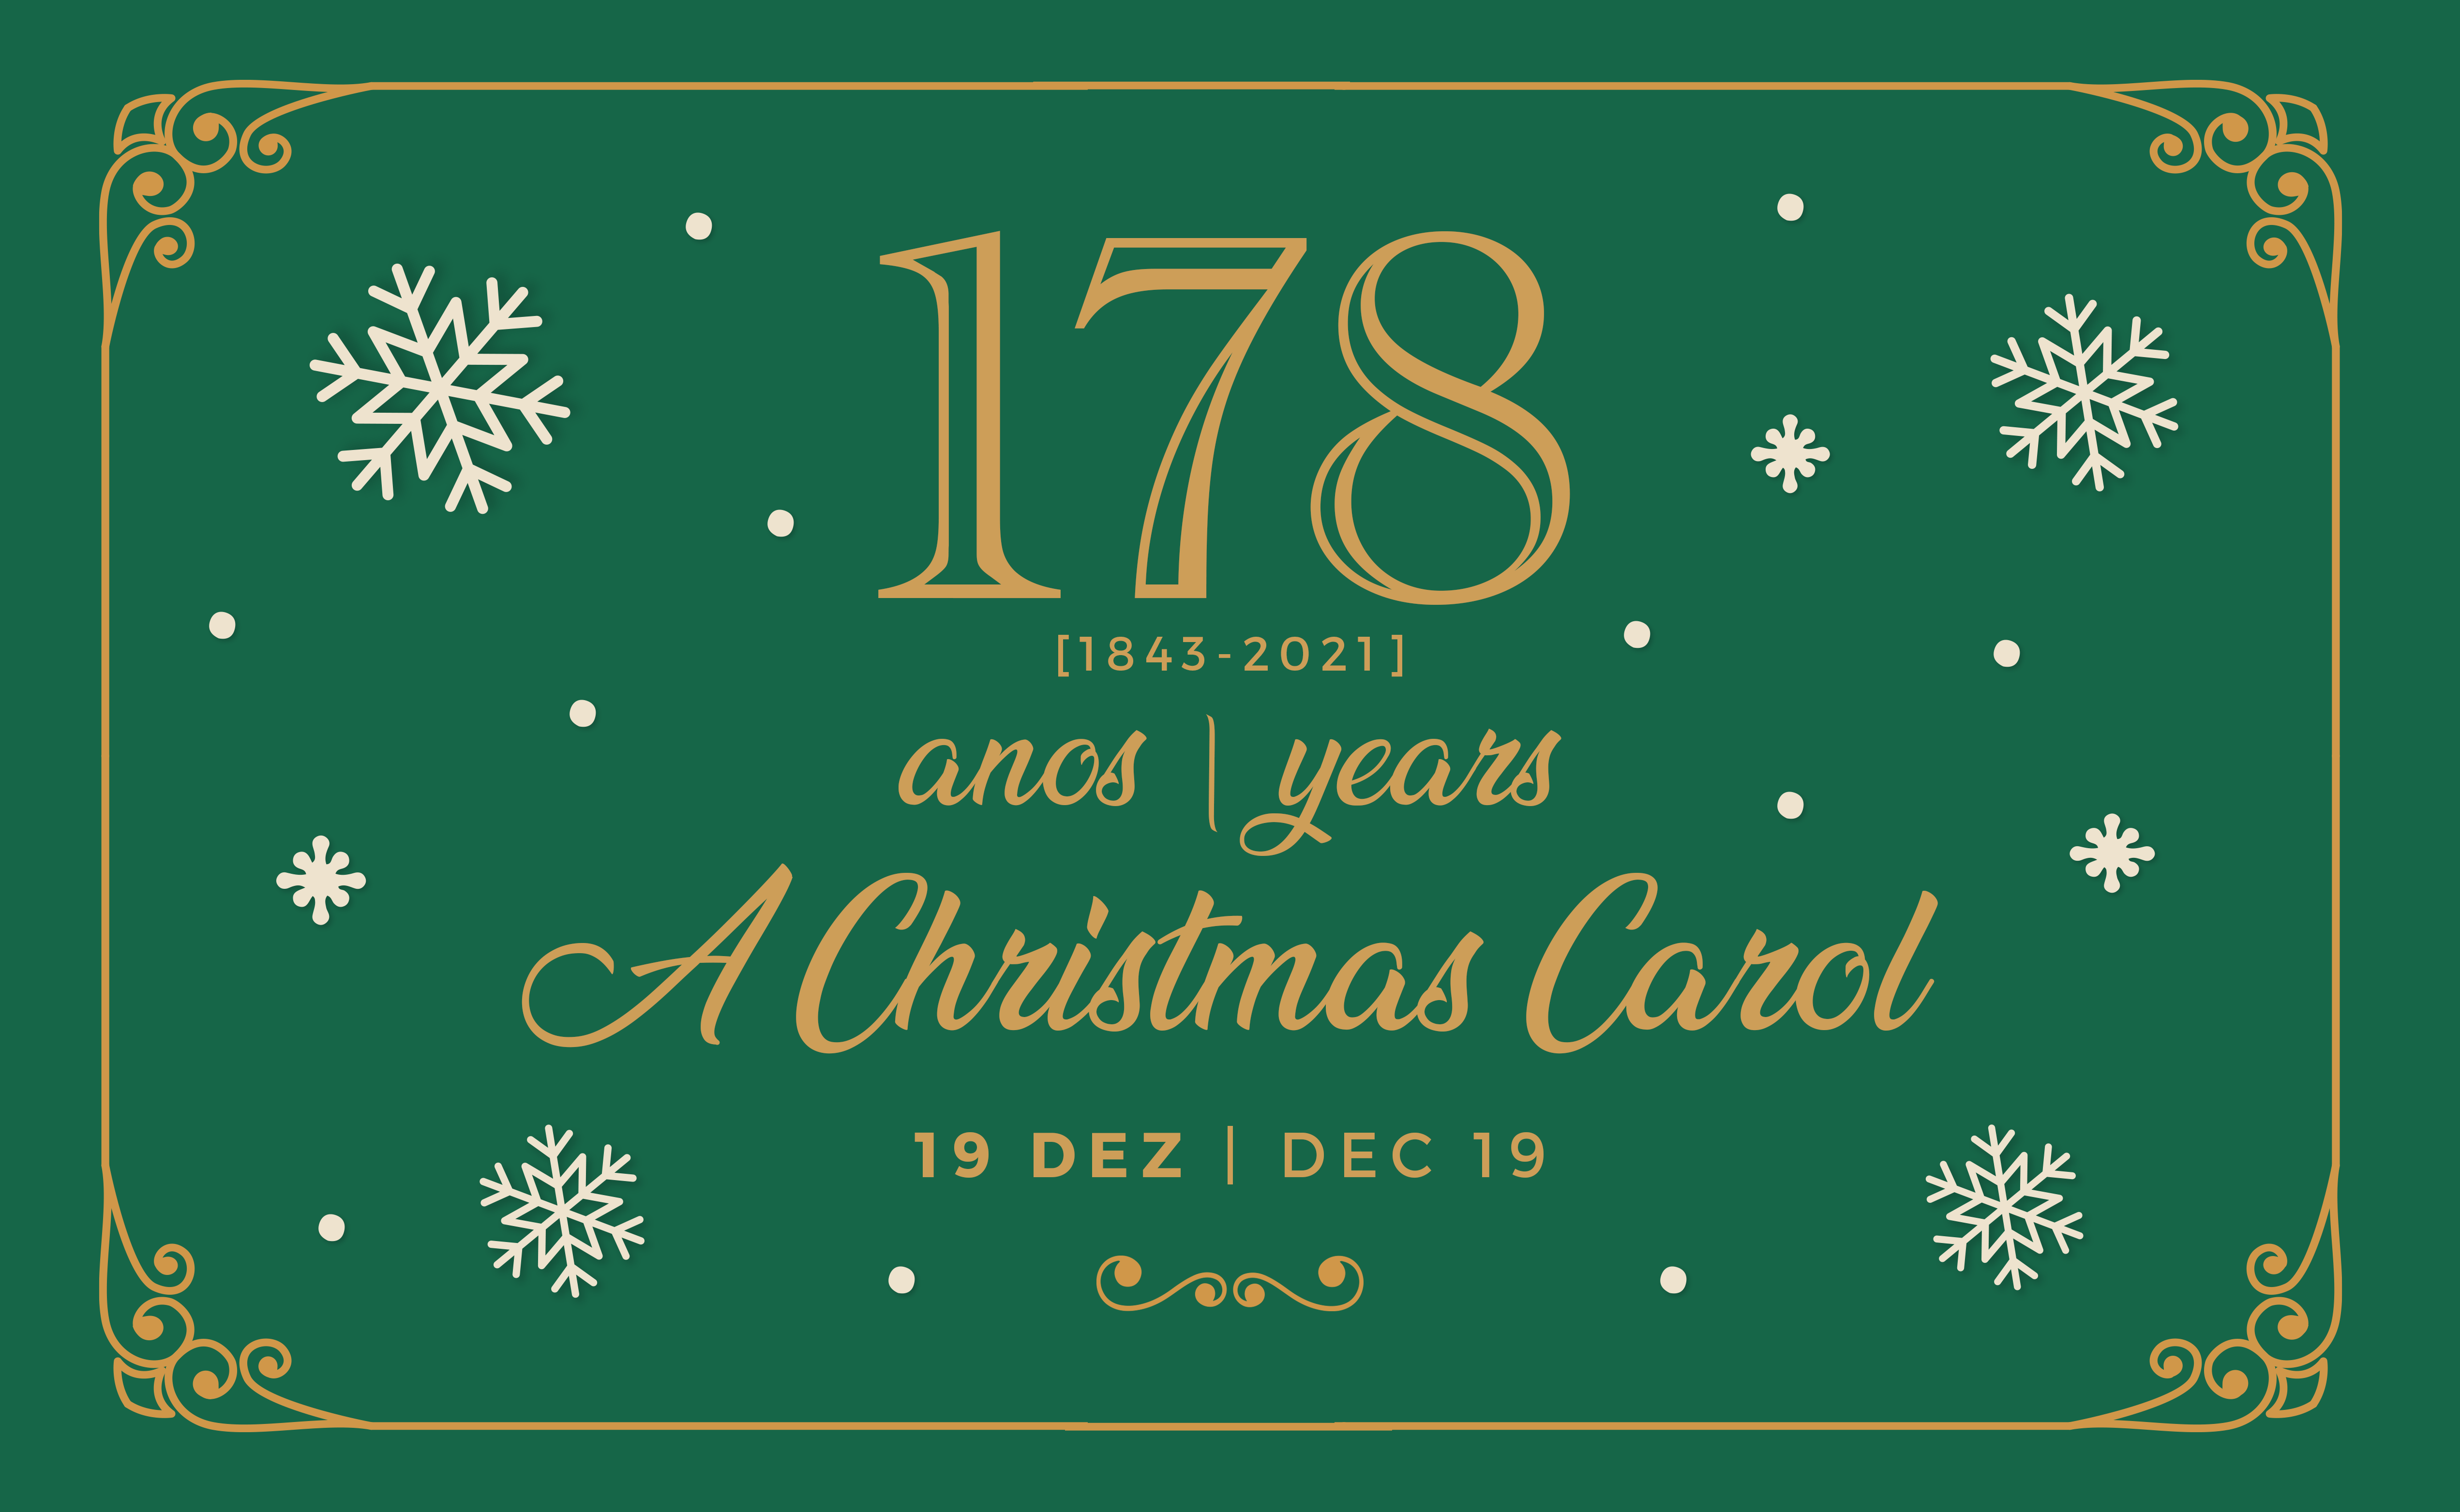 CELEBRATION OF THE 178 YEARS OF “A CHRISTMAS CAROL”